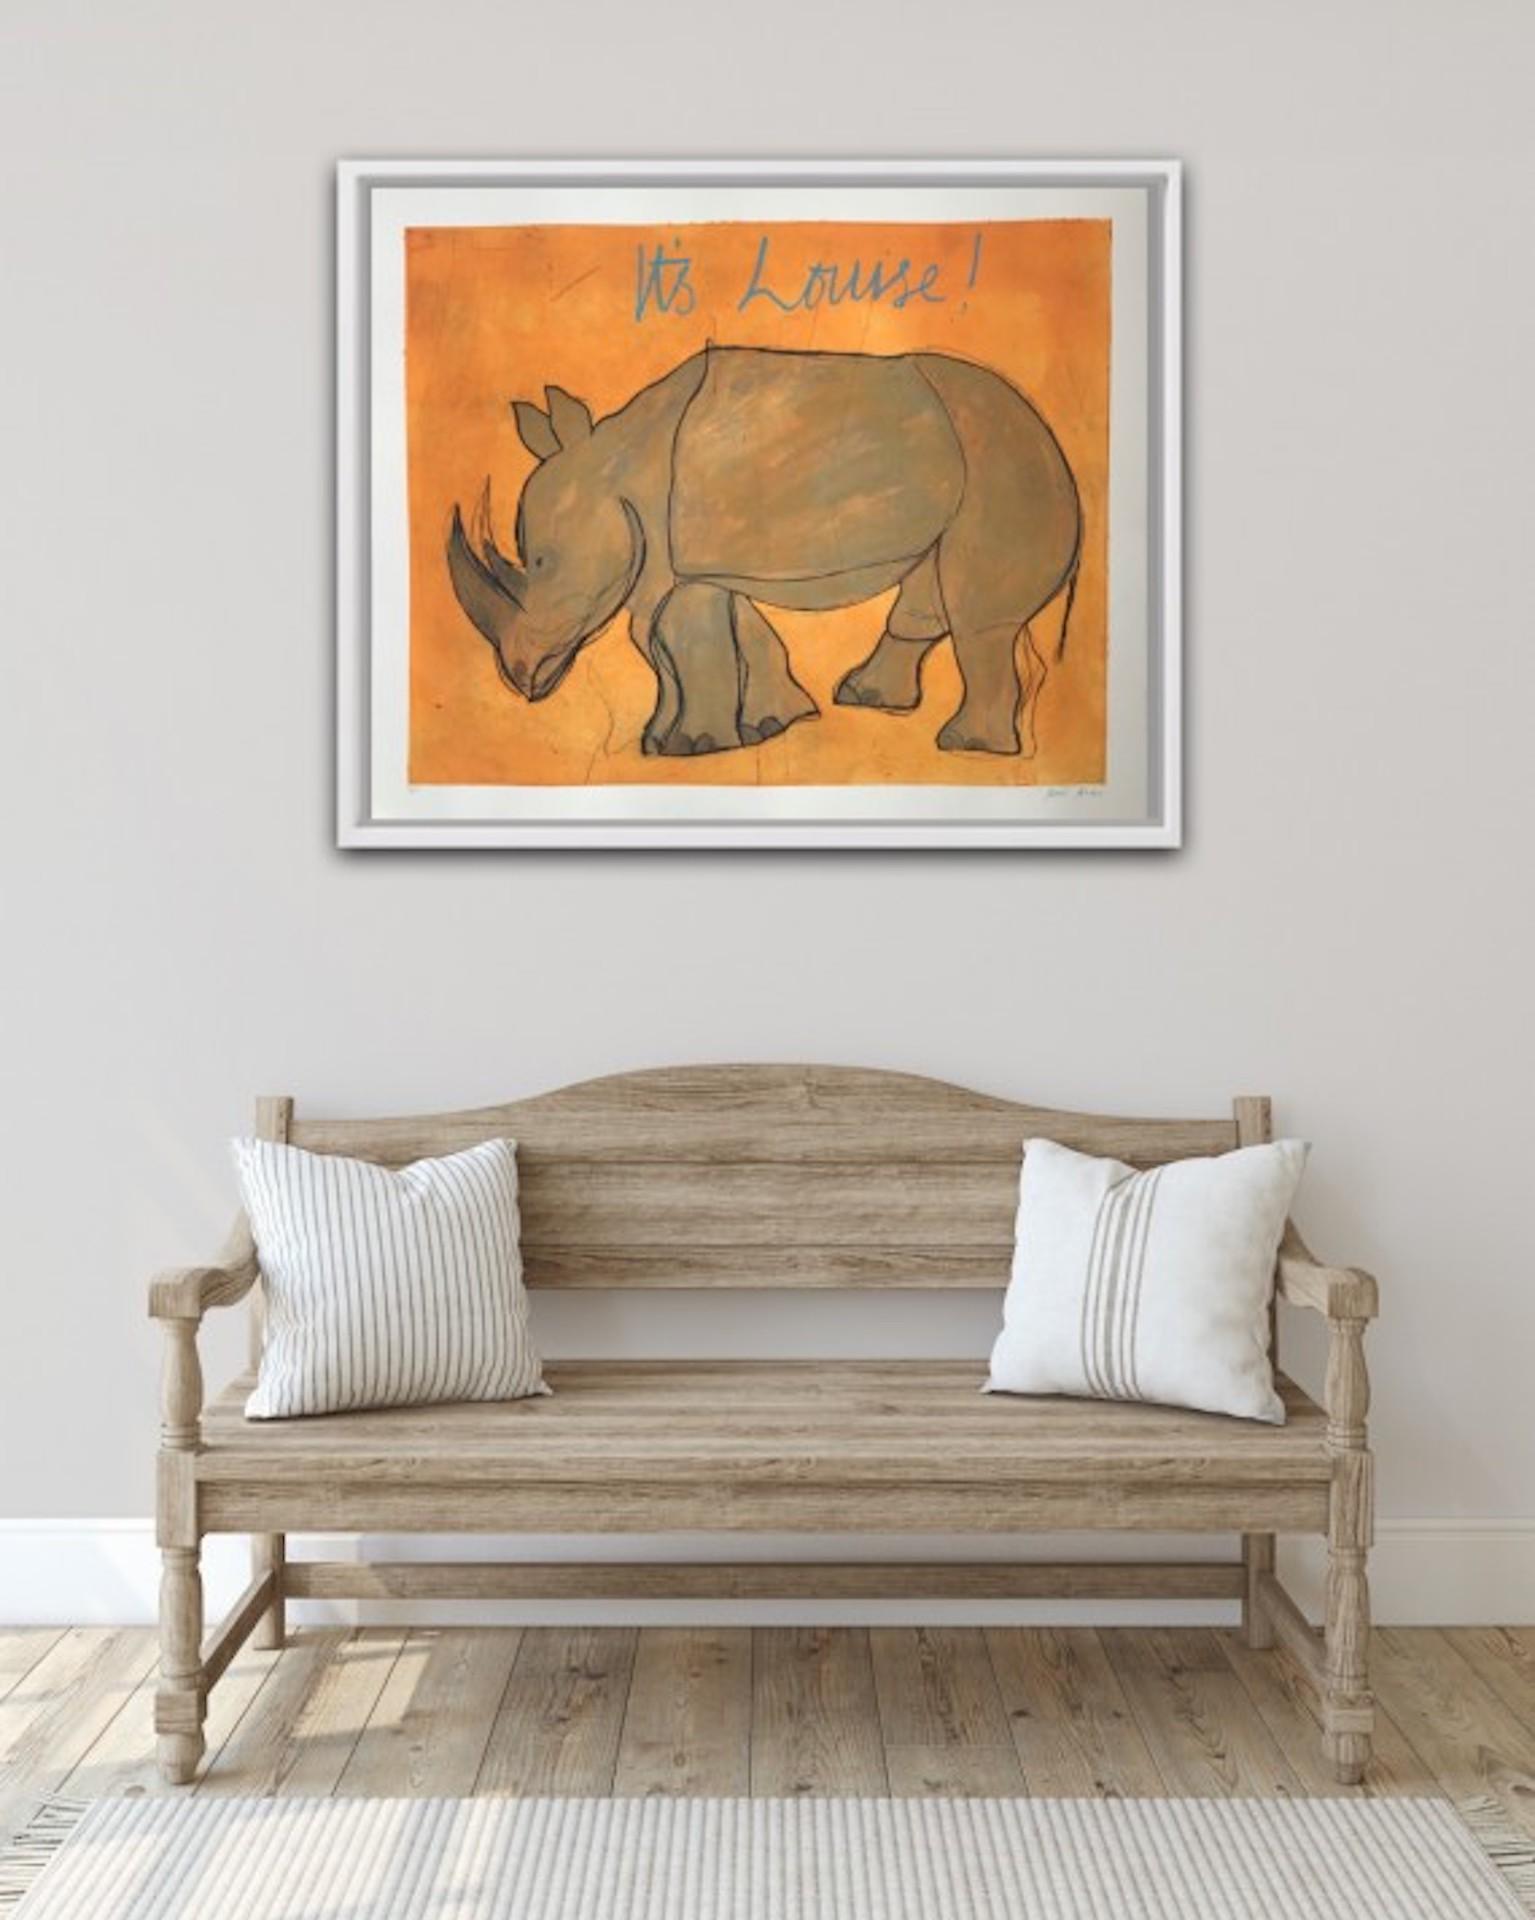 Kate Boxer, It’s Louise!, rhinoceros , animal art  Limited Edition Print 7